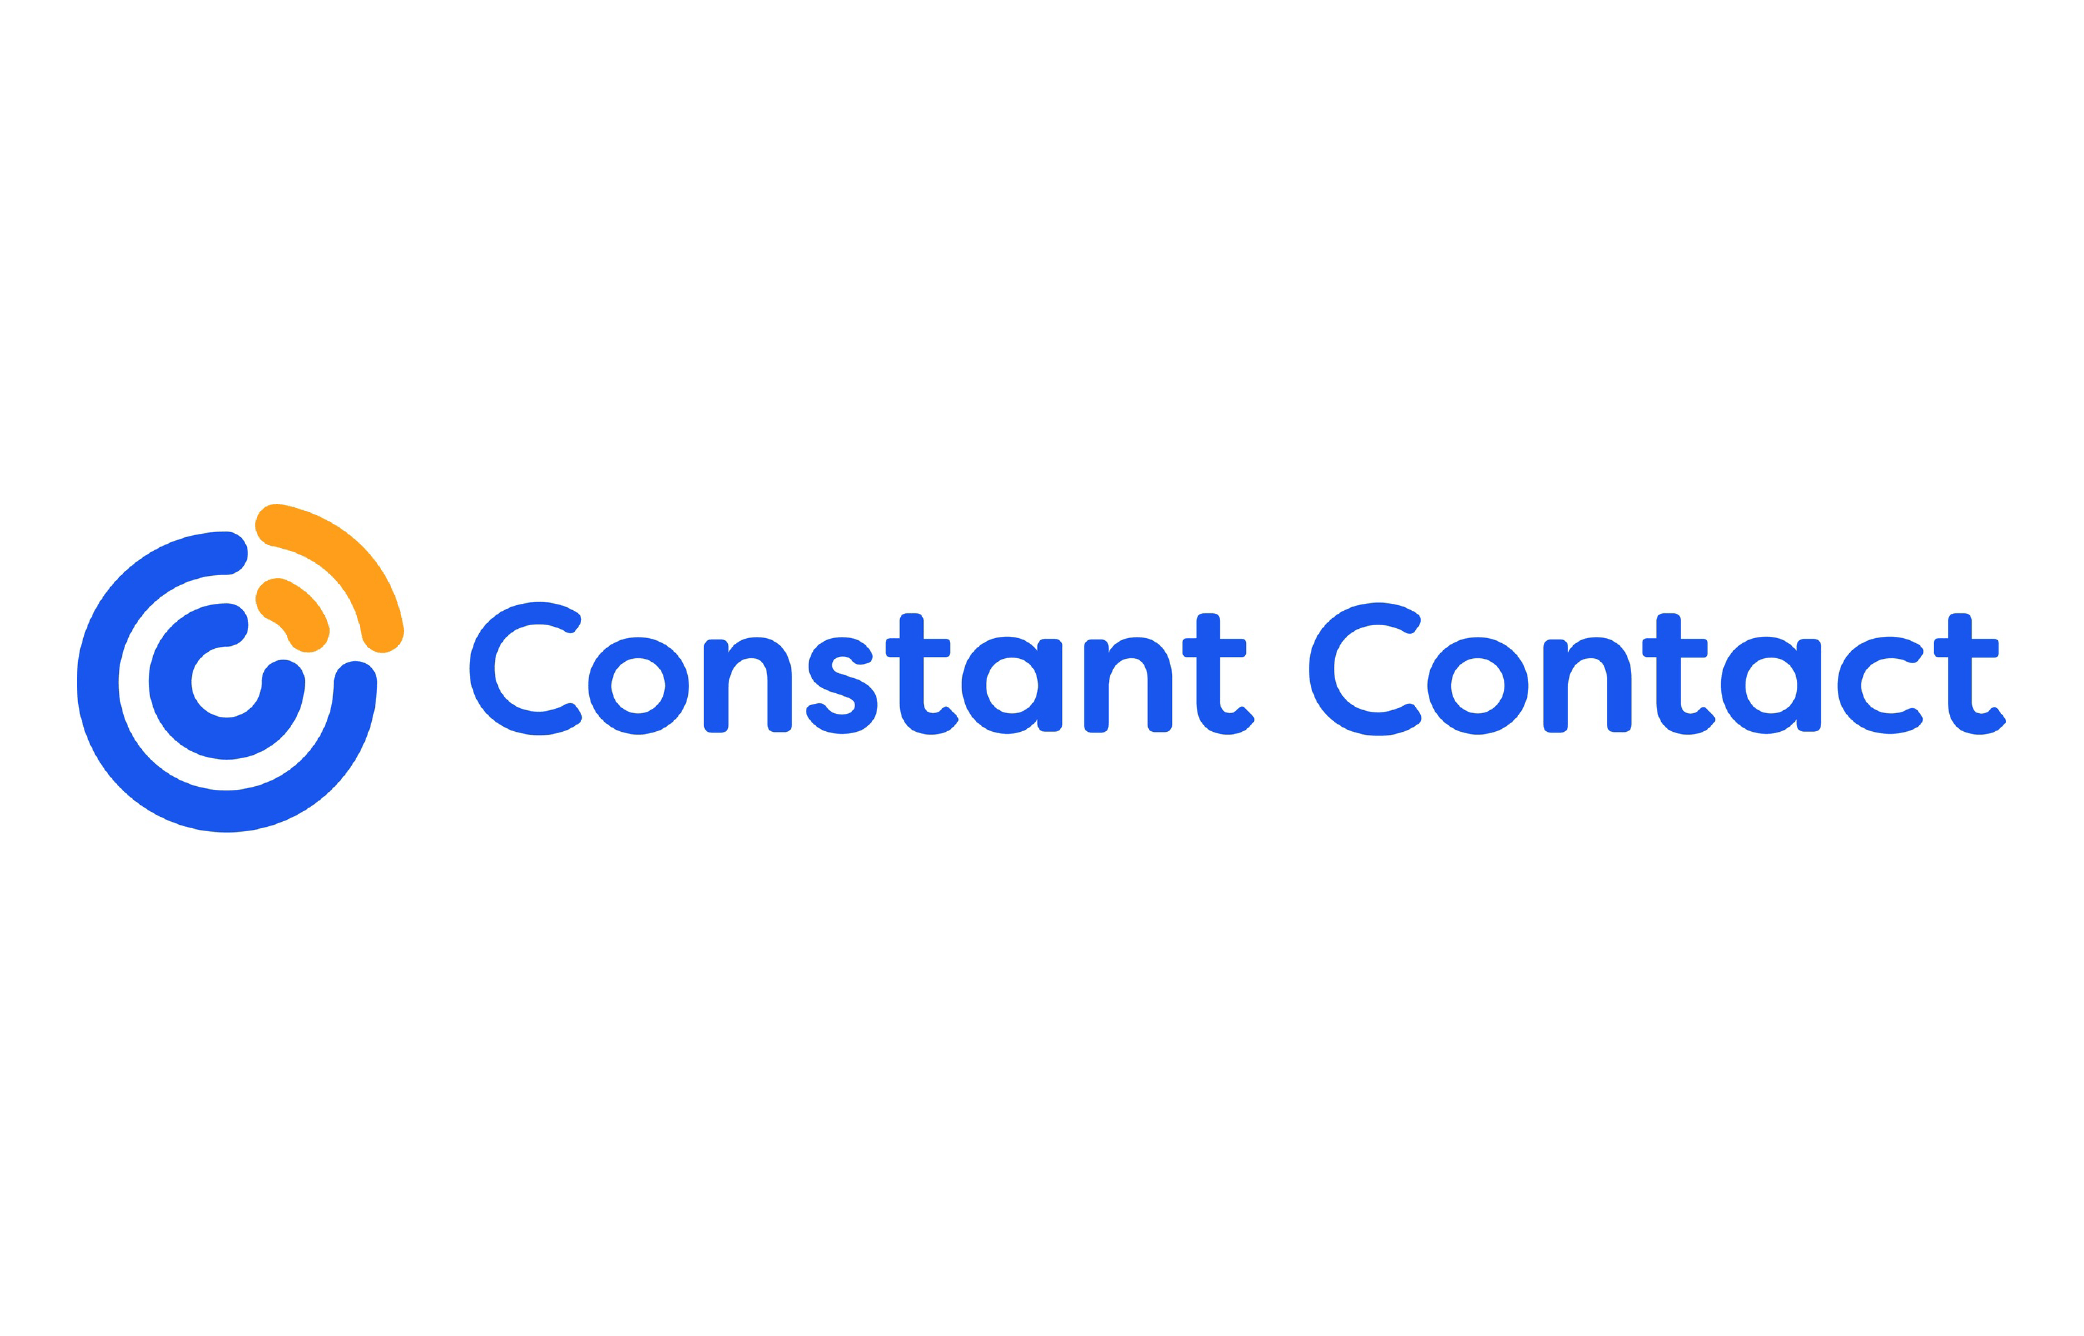 Doug DeMuro on Twitter: "Check out @ConstantContact, an online marketing company that can help you grow your business with e-mail marketing tools and expertise, a sitebuilder that makes it easy to create